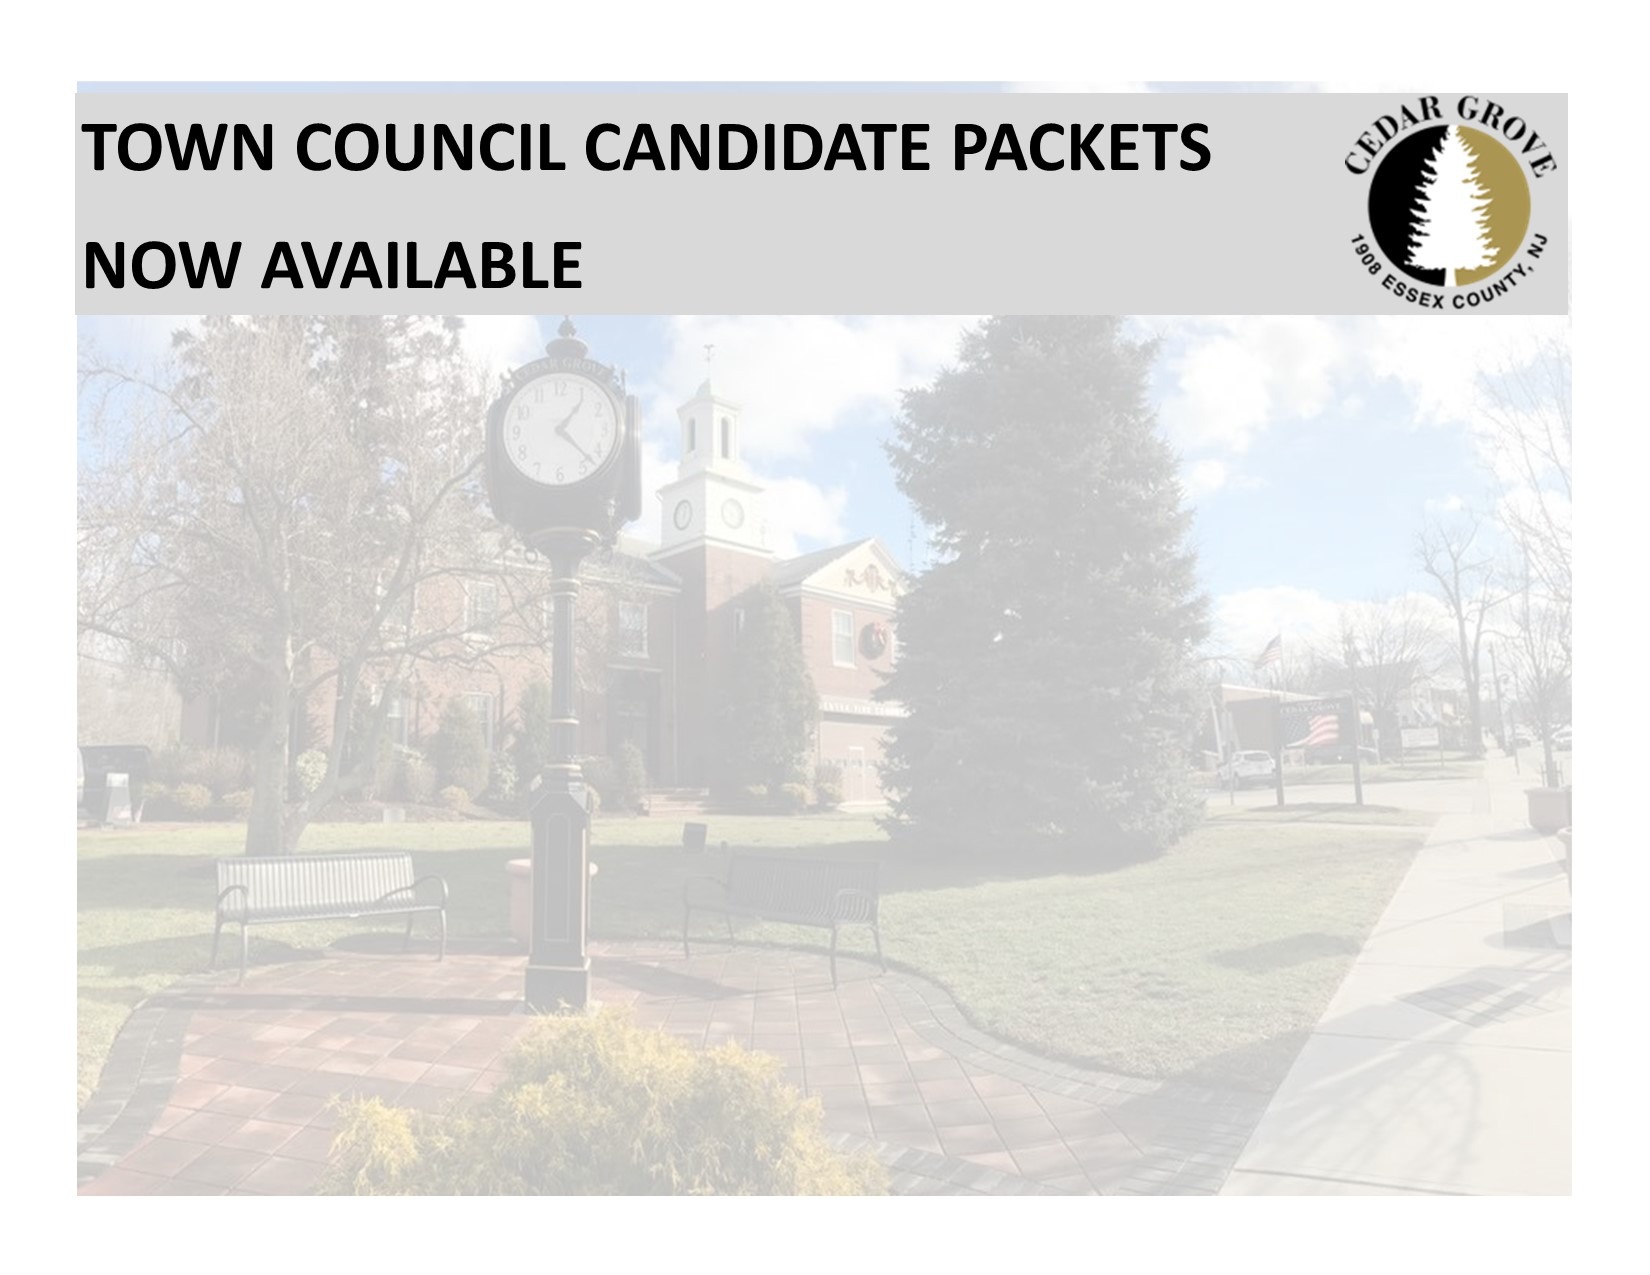 Candidate Packets Available for 2023 Municipal Election